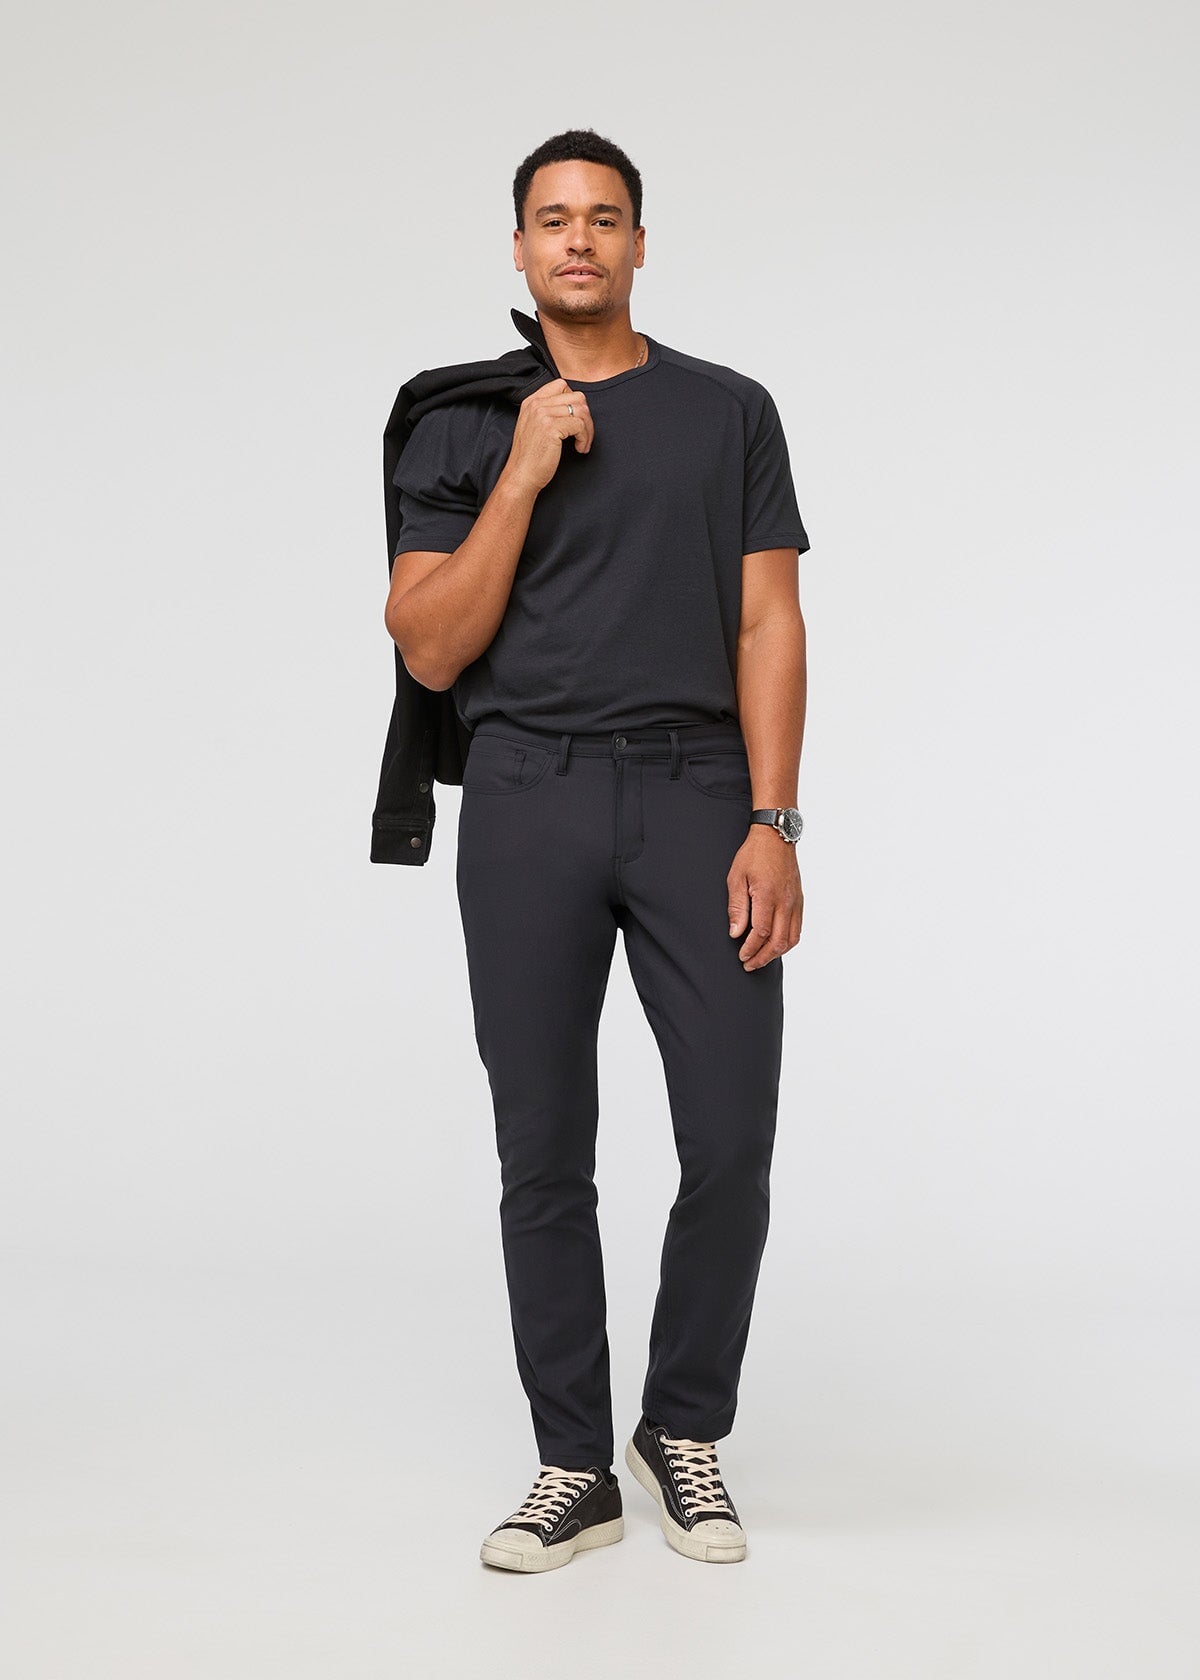 Men's Super Combed Cotton Rich Elastane Stretch Woven Fabric Slim Fit All  Day Pants with Side Pockets - Navy